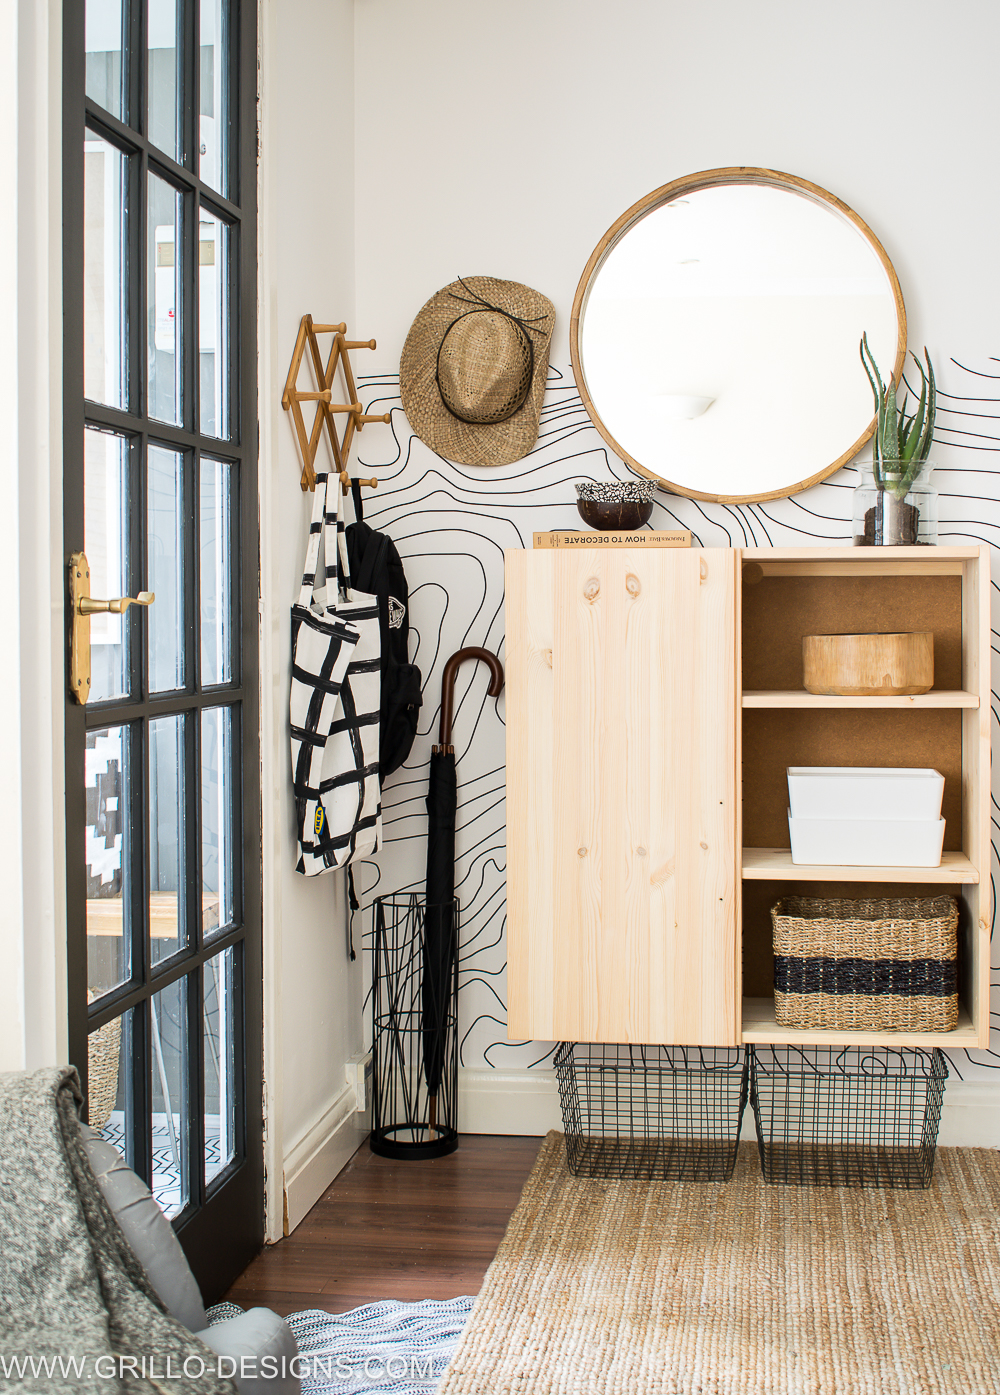 Big Style in a Small Space Rental- Organizing Tips